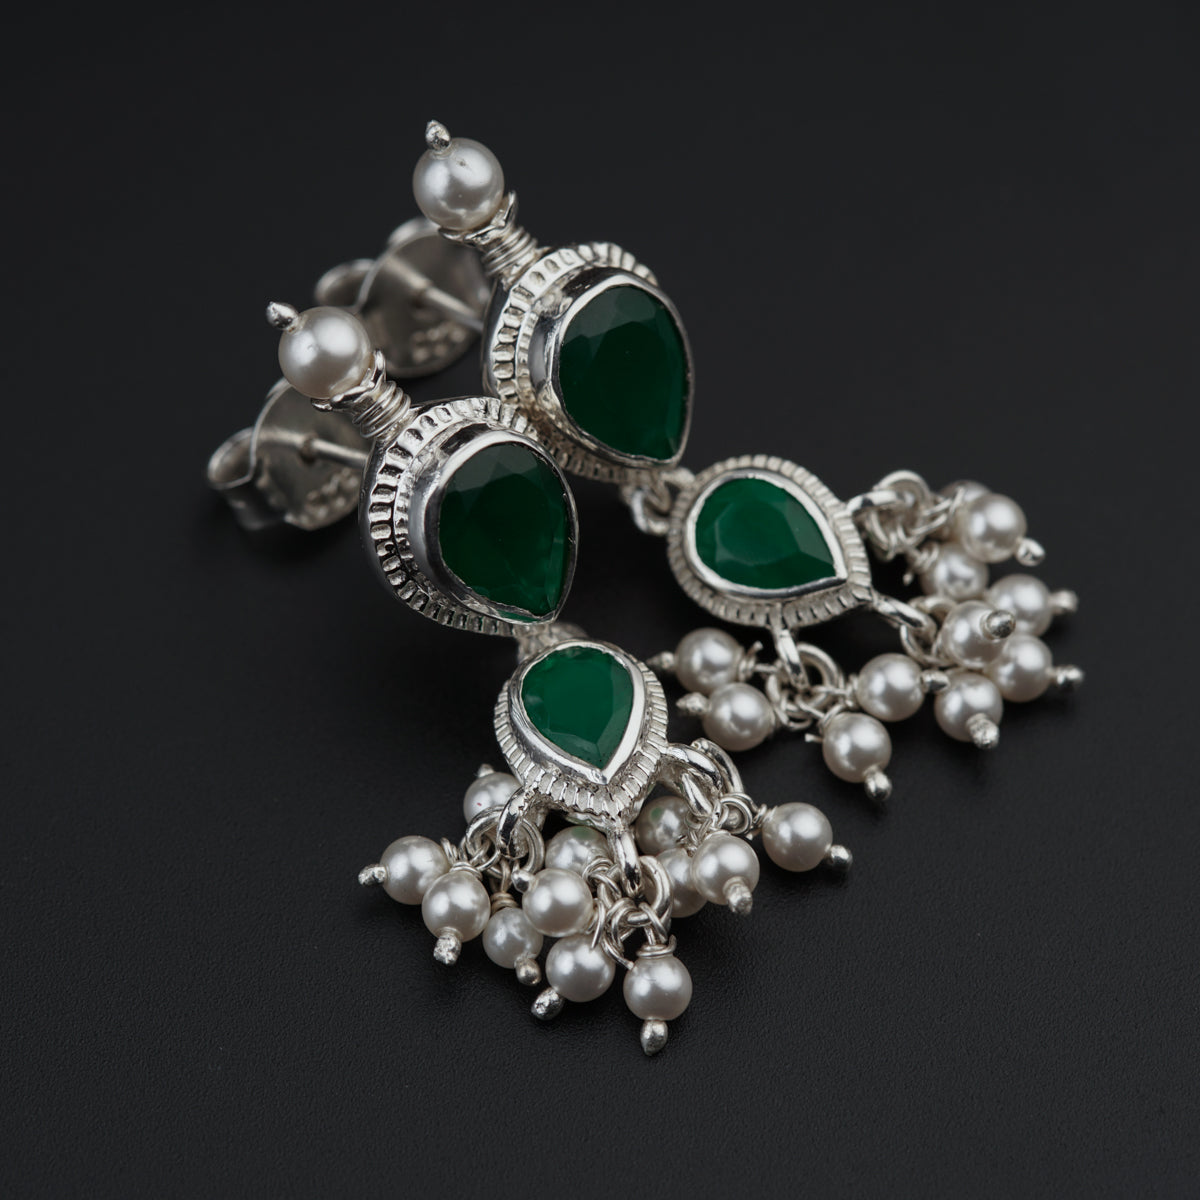 a pair of earrings with green stones and pearls